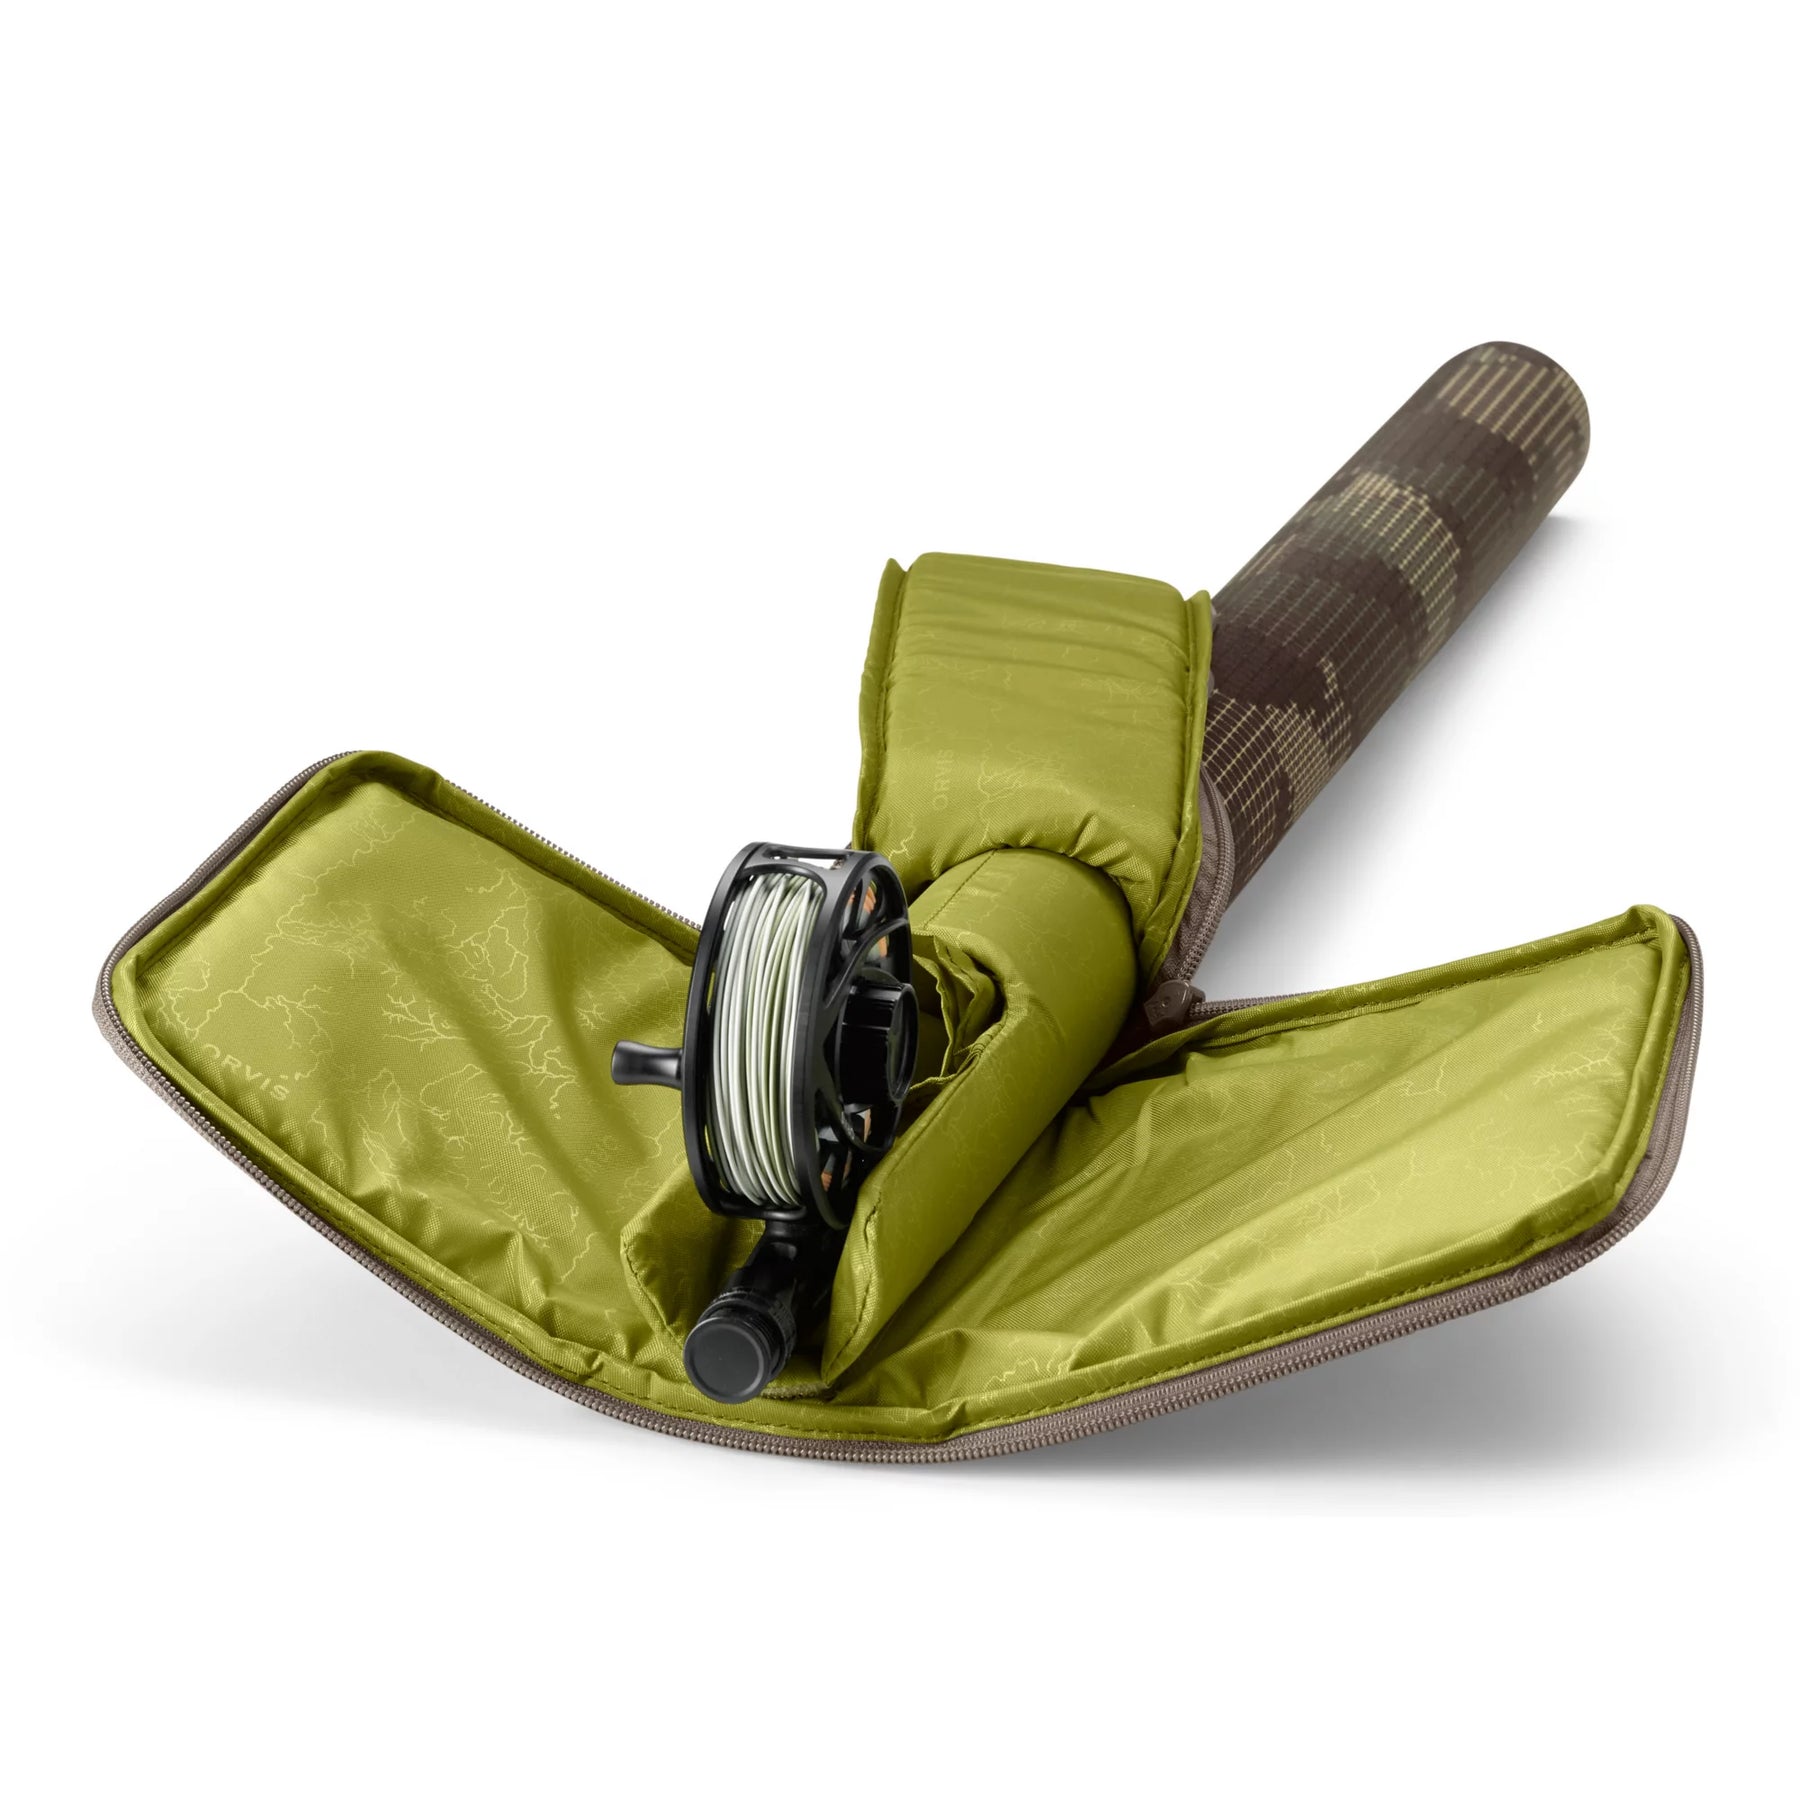 ORVIS ROD AND REEL CASE – Anglers Den